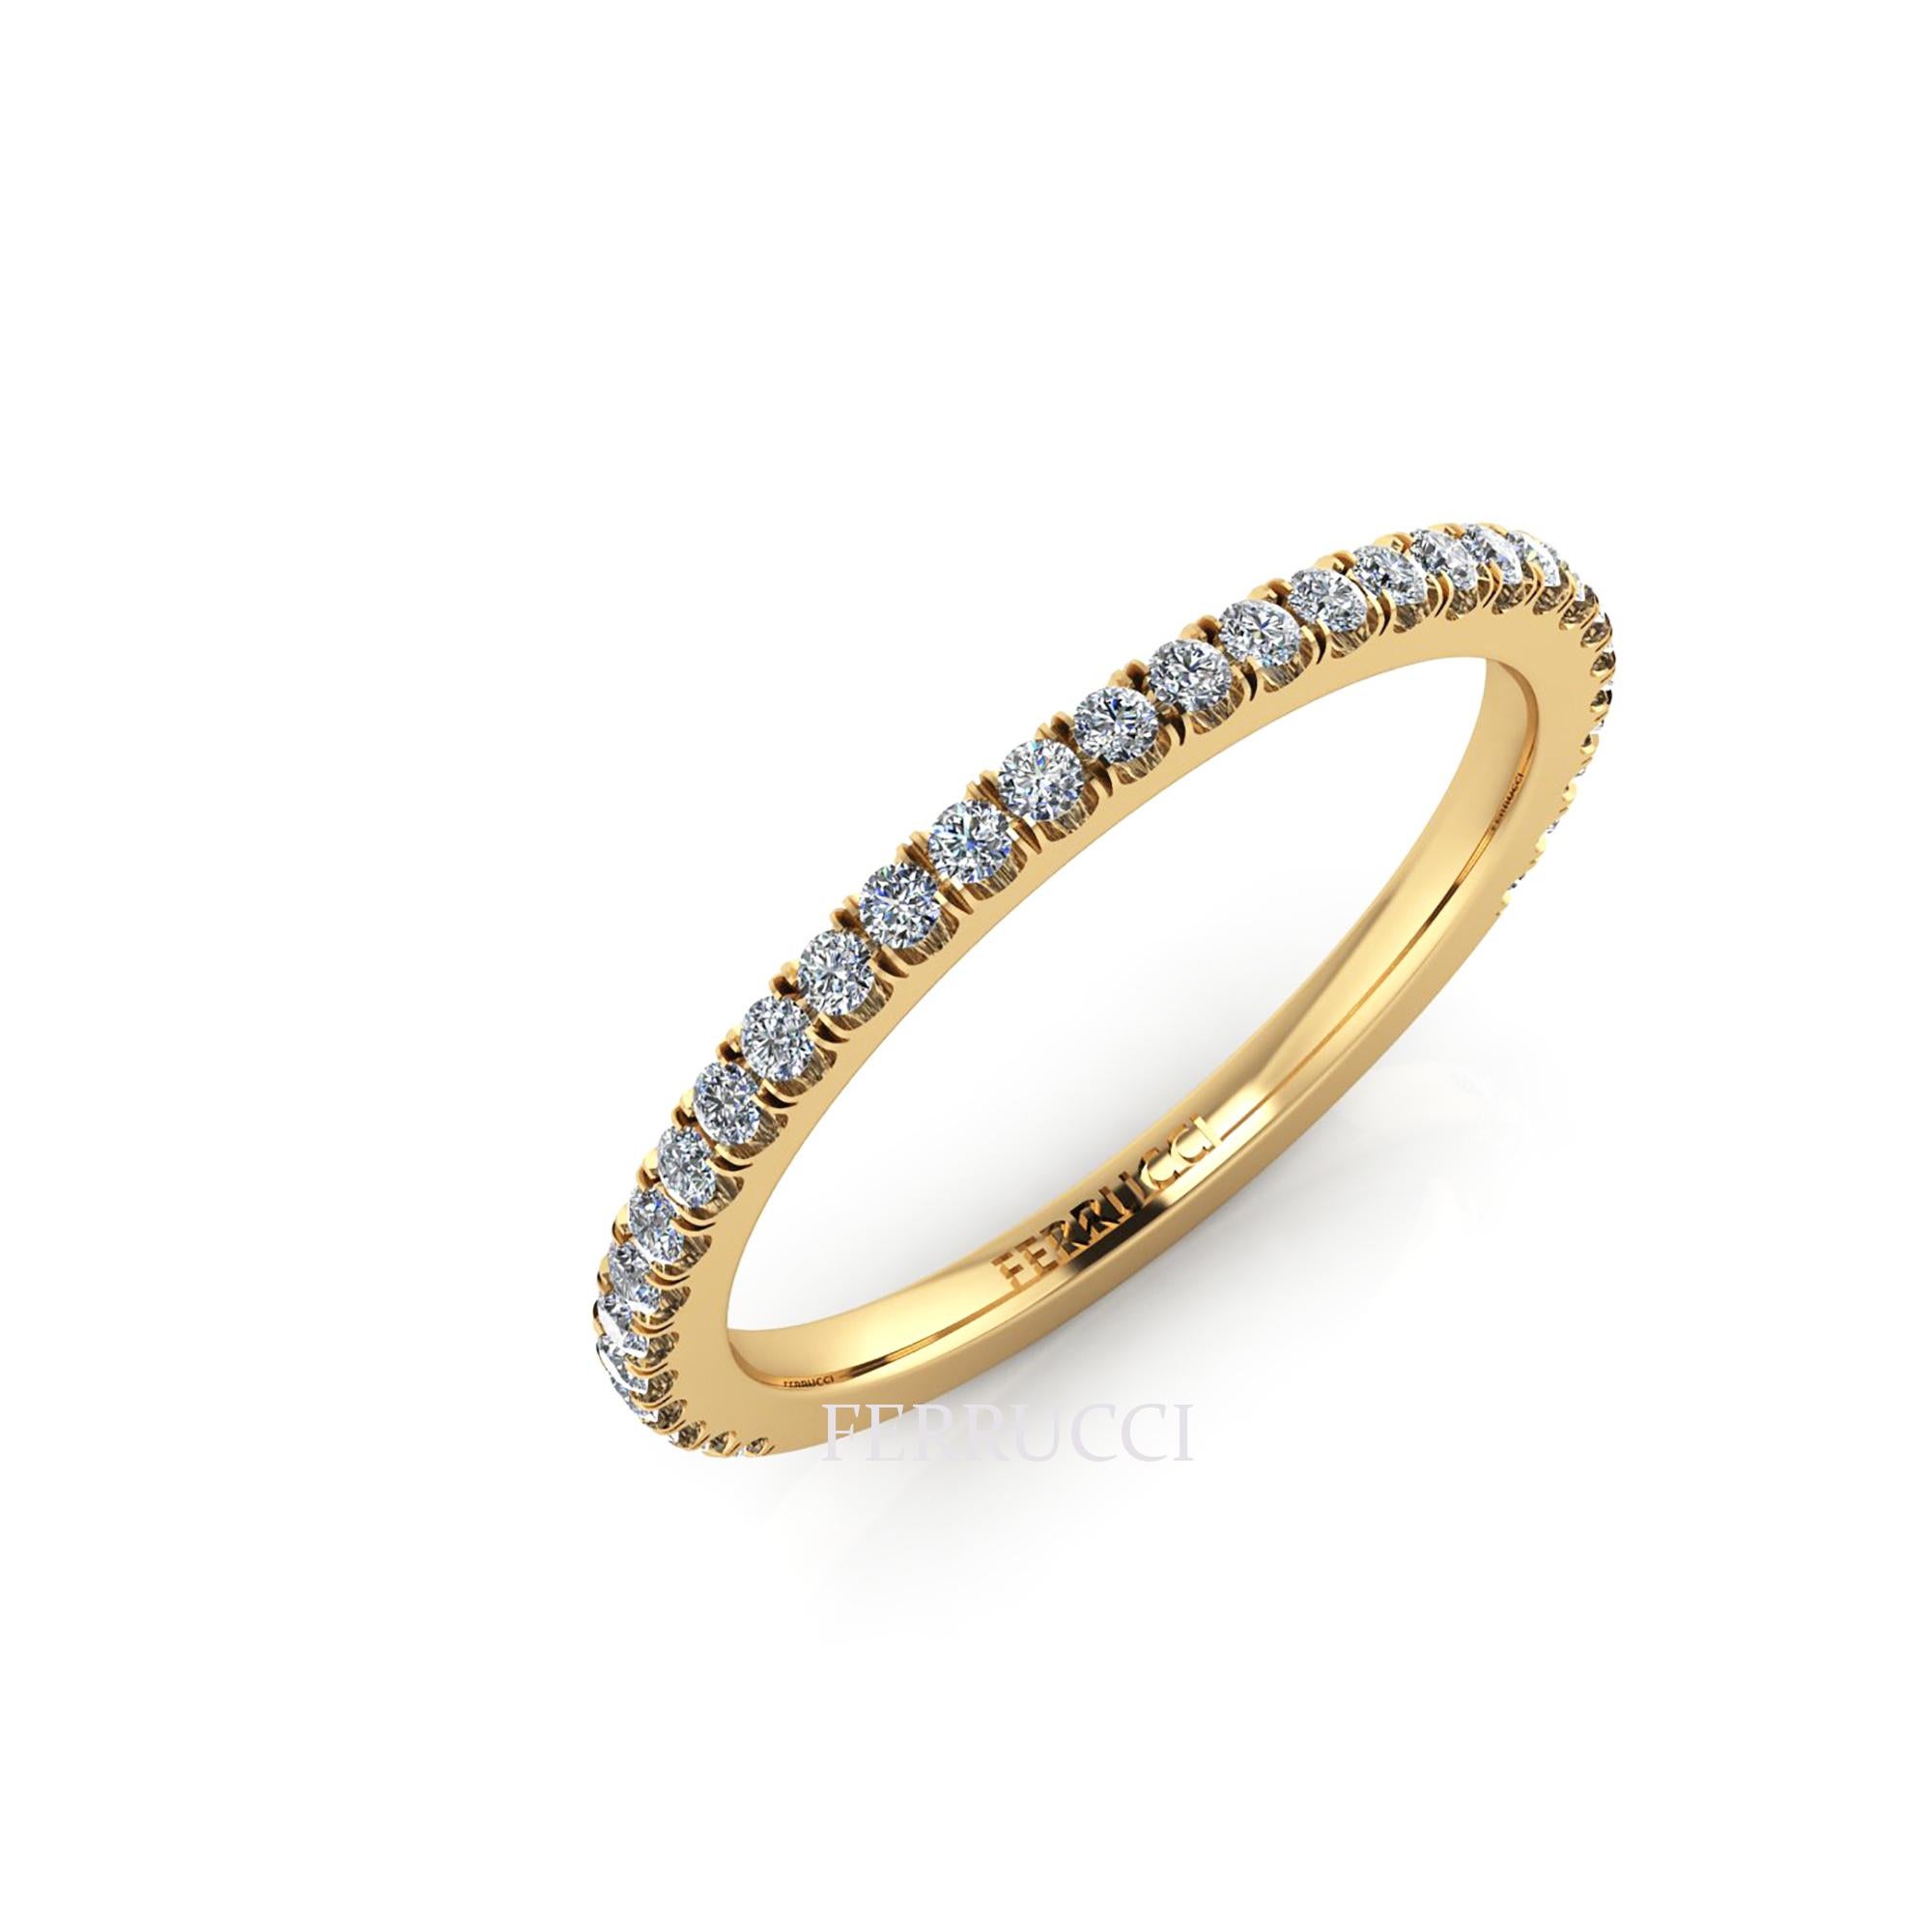 18k gold thin band ring, stackable rings, with approximately 0.30 carat of white diamonds G color, VS clarity, hand set, comfortable fit, the band measure 1.5 mm width Wear single or multiple flat bands for different looks.
Custom orders